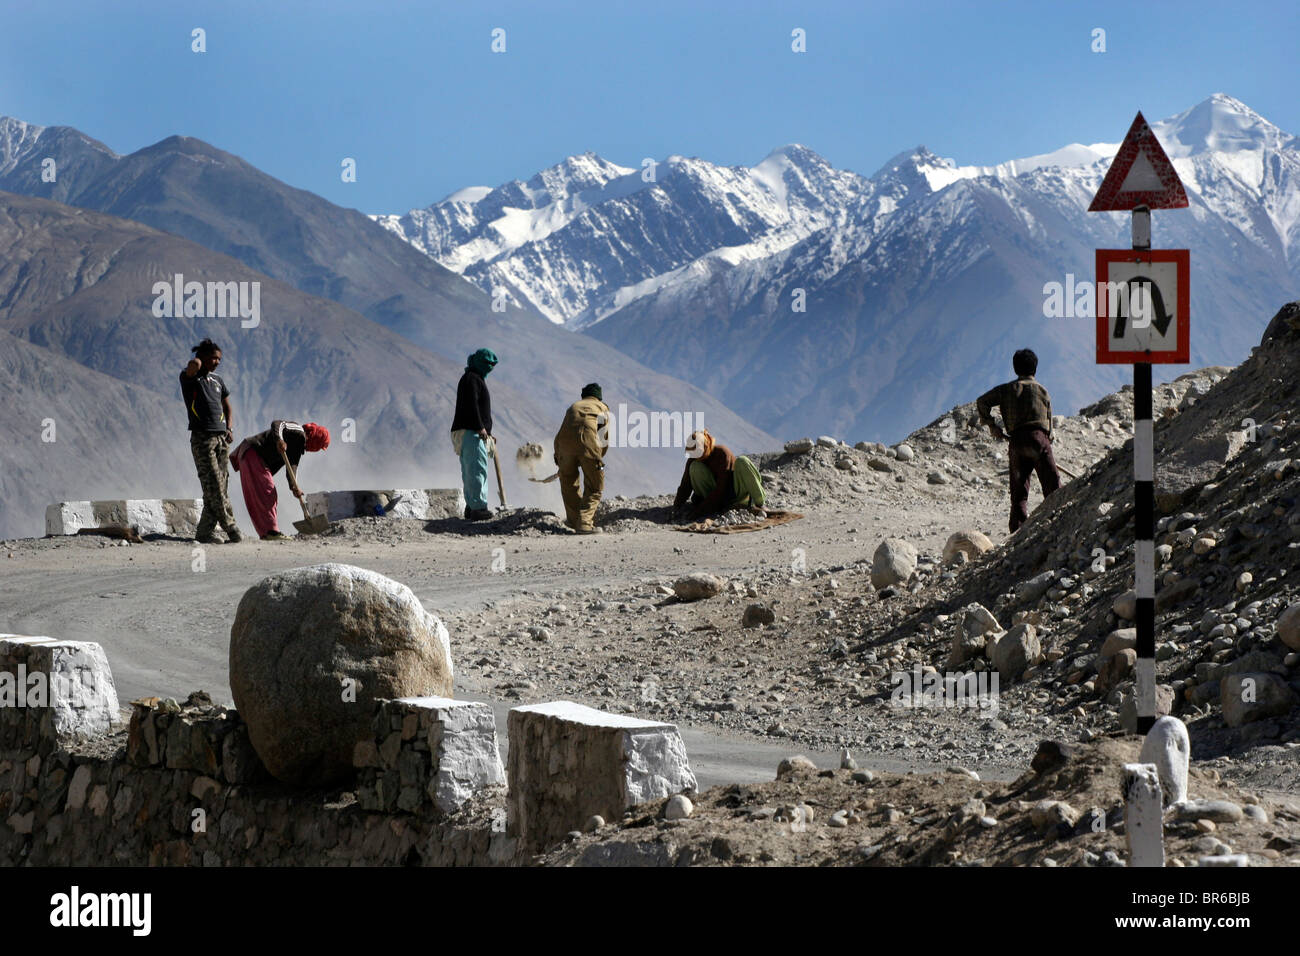 Laborers repair the road to the Khardung La pass, claimed to be the highest motorable road in the world, in Ladakh, India. Stock Photo